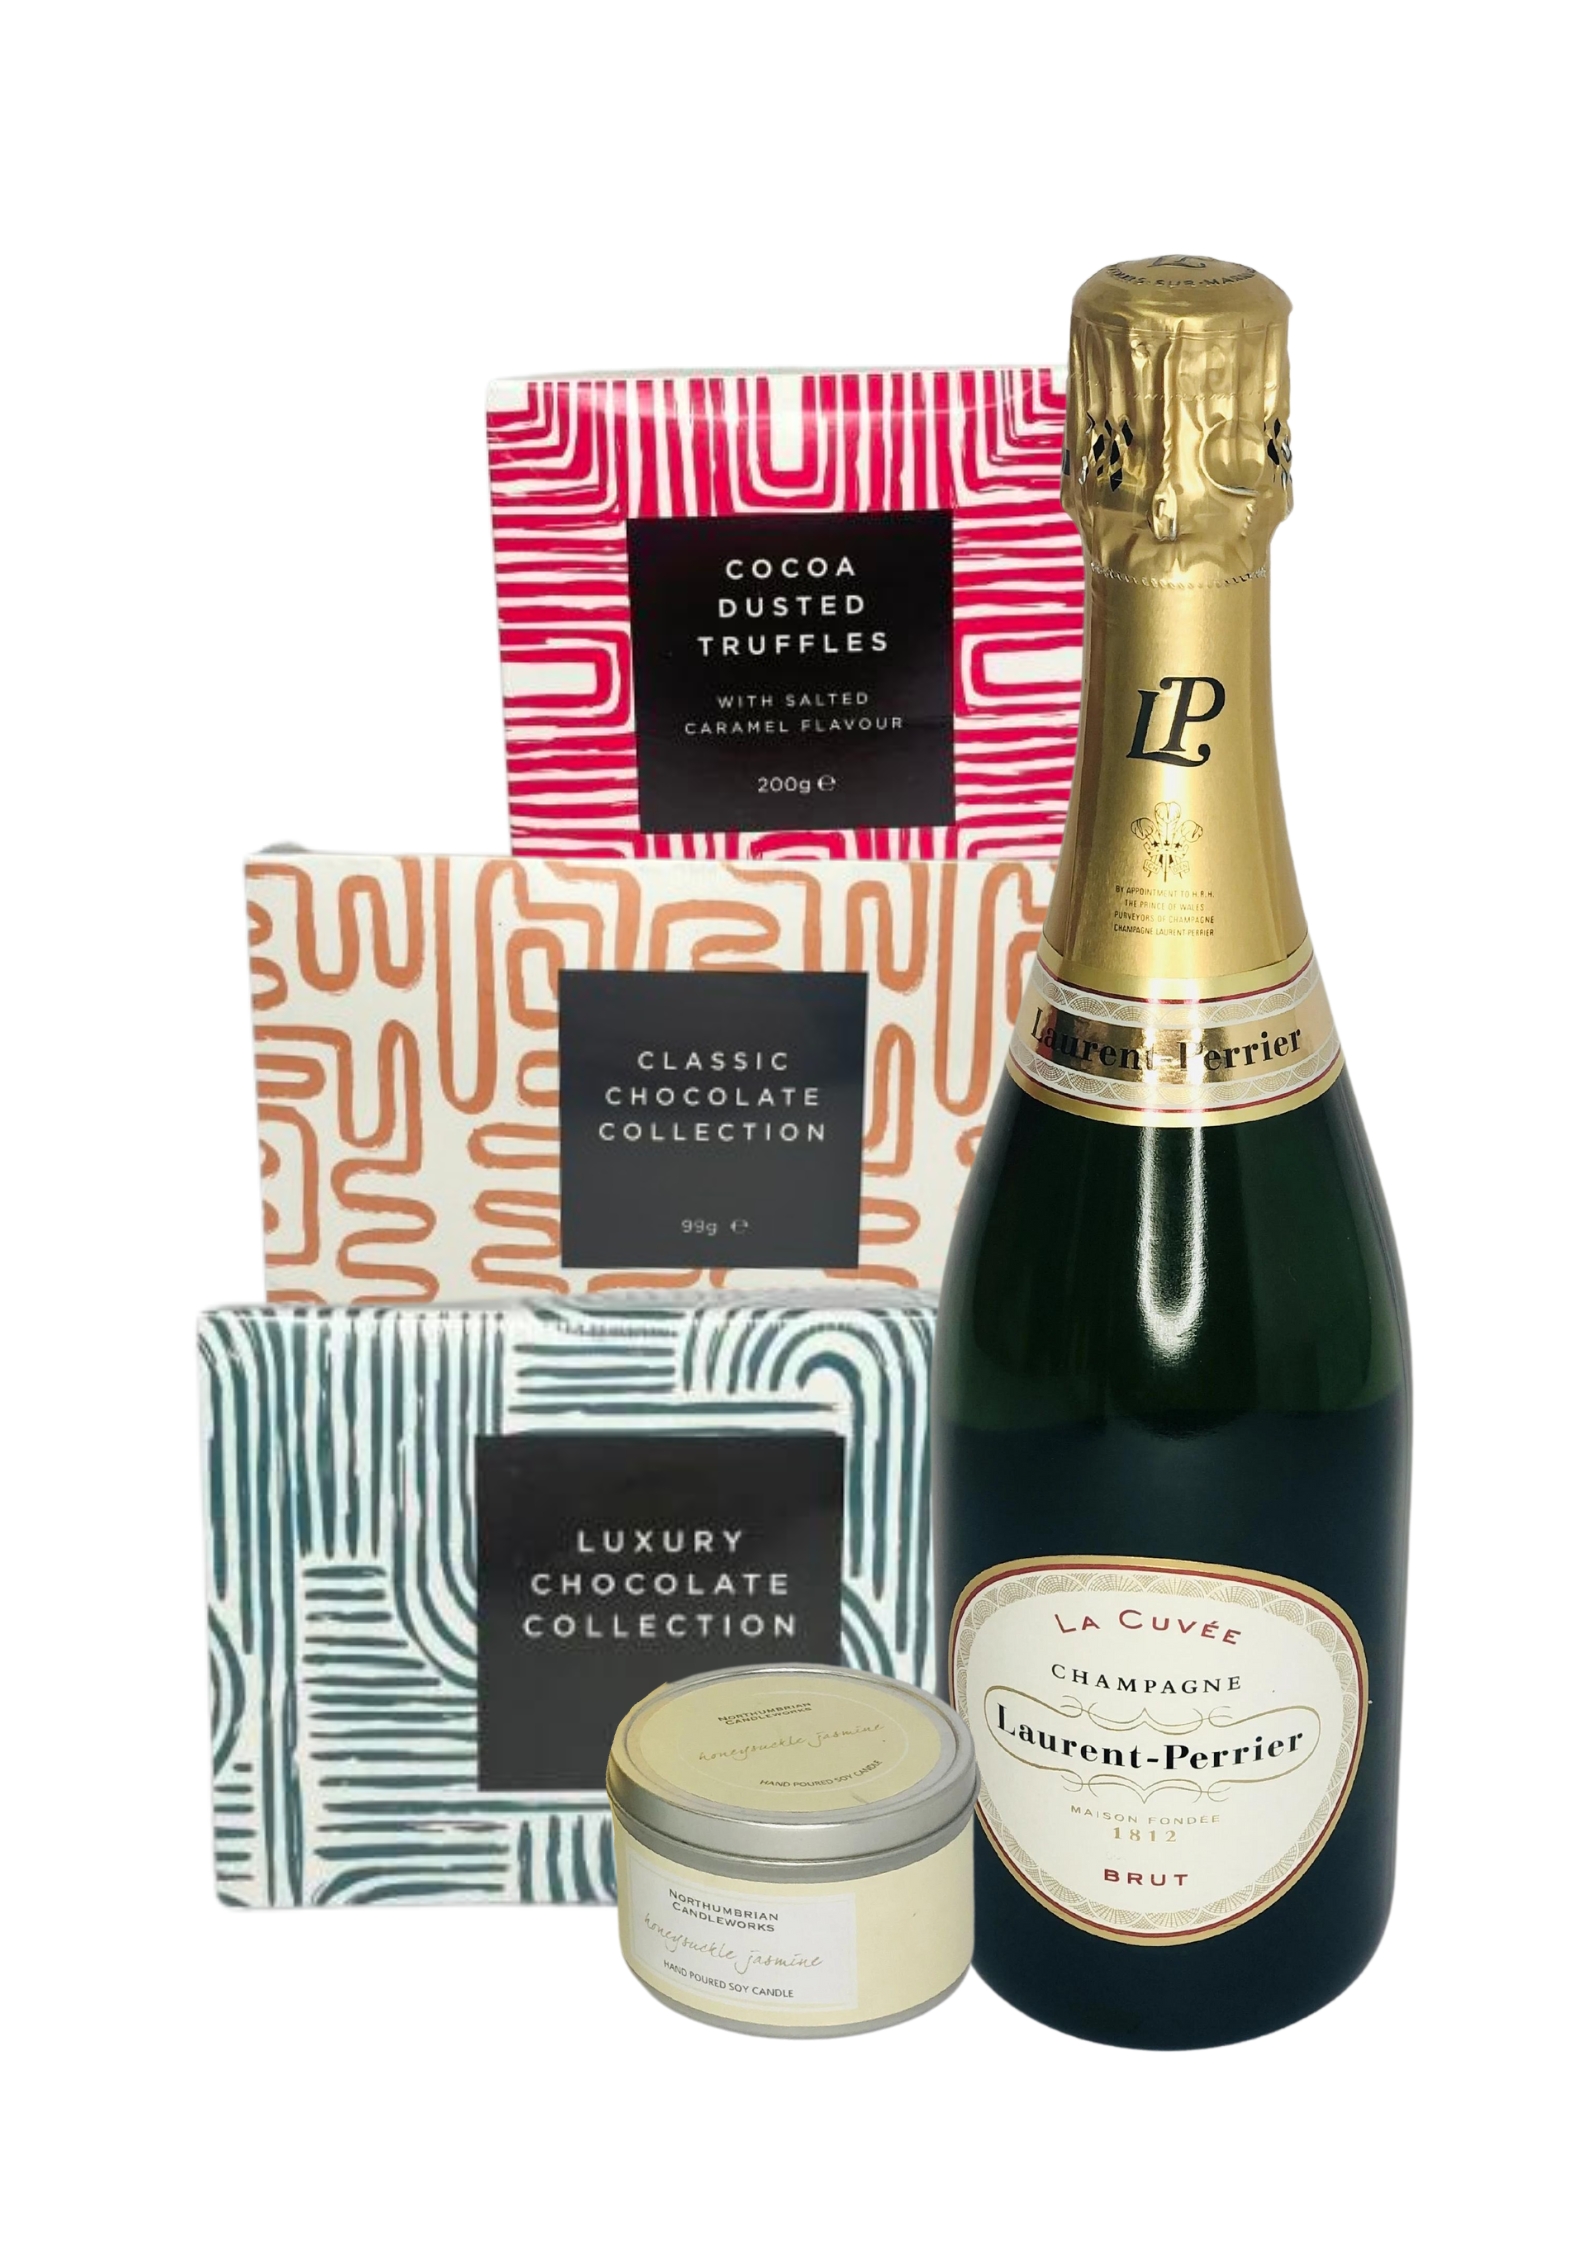 <p>Order this Luxury Bubbles and Truffles Gift Set to celebrate any occasion and you will not be disappointed.  Containing, a bottle of Luxury Gosset Grande Reserve Champagne, a box of Maison Fougere Belgian Milk Chocolate Truffles together with an eco-friendly Soy Scented Candle beautifully presented in a stylish Gift Box.</p>
<br>
<h2>Gift Delivery Coverage</h2>
<p>Our shop delivers flowers and gifts to the following Liverpool postcodes L1 L2 L3 L4 L5 L6 L7 L8 L11 L12 L13 L14 L15 L16 L17 L18 L19 L24 L25 L26 L27 L36 L70 ONLY.  If your order is for an area outside unfortunately we cannot process your order because of the difference in stock at other florists.</p>
<br>
<h2>Alcohol Gifts</h2>
<p>As a licensed florist, we are able to supply alcoholic drinks either as a gift on their own or with flowers. We have carefully selected a range that we know you will love either as a gift in itself or to provide that extra bit of celebratory luxury to a floral gift.</p>
<p>This gift set contains a bottle of Gosset Champagne which comes in a black luxury box, together with a box of 140g Maison Fougere Milk Chocolate Truffles, and a locally made eco-friendly Northumbrian Scented Soy Candle in a stylish tin.</p>
<p>Have this giftset delivered to someone special to celebrate as an alternative to having flowers delivered, or have it delivered with your flowers to really celebrate!</p>
<br>
<h2>Online Gift Ordering | Online Gift Delivery</h2>
<p>Through this website you can order 24 hours, Booker Gifts and Gifts Liverpool have put together this carefully selected range of Flowers, Gifts and Finishing Touches to make Gift ordering as easy as possible. This means even if you do not live in Liverpool we make it easy for you to see what you are getting when buying for delivery in Liverpool.</p>
<br>
<h2>Liverpool Flower and Gift Delivery</h2>
<p>We are open 7 days a week and offer advanced booking flower delivery, same-day flower delivery, Guaranteed AM Flower Delivery and also offer Sunday Flower Delivery.</p>
<p>Our florists Deliver in Liverpool and can provide flowers for you in Liverpool, Merseyside. And through our network of florists can organise flower deliveries for you nationwide.</p>
<br>
<h2>Beautiful Gifts Delivered | Best Florist in Liverpool</h2>
<p>Having been nominated the Best Florist in Liverpool by the independent Three Best Rated for the 5th year running you can feel secure with us</p>
<p>You can trust Booker Gifts and Gifts to deliver the very best for you.</p>
<br>
<h2>5 Star Google Review</h2>
<p><em>So Pleased with the product and service received. I am working away currently, so ordered online, and after my own misunderstanding with online payment, I contacted the florist directly to query. Gemma was very prompt and helpful, and my flowers were arranged easily. They arrived this morning and were as impactful as the pictures on the website, and the quality of the flowers and the arrangement were excellent. Great Work! David Welsh</em></p>
<br>